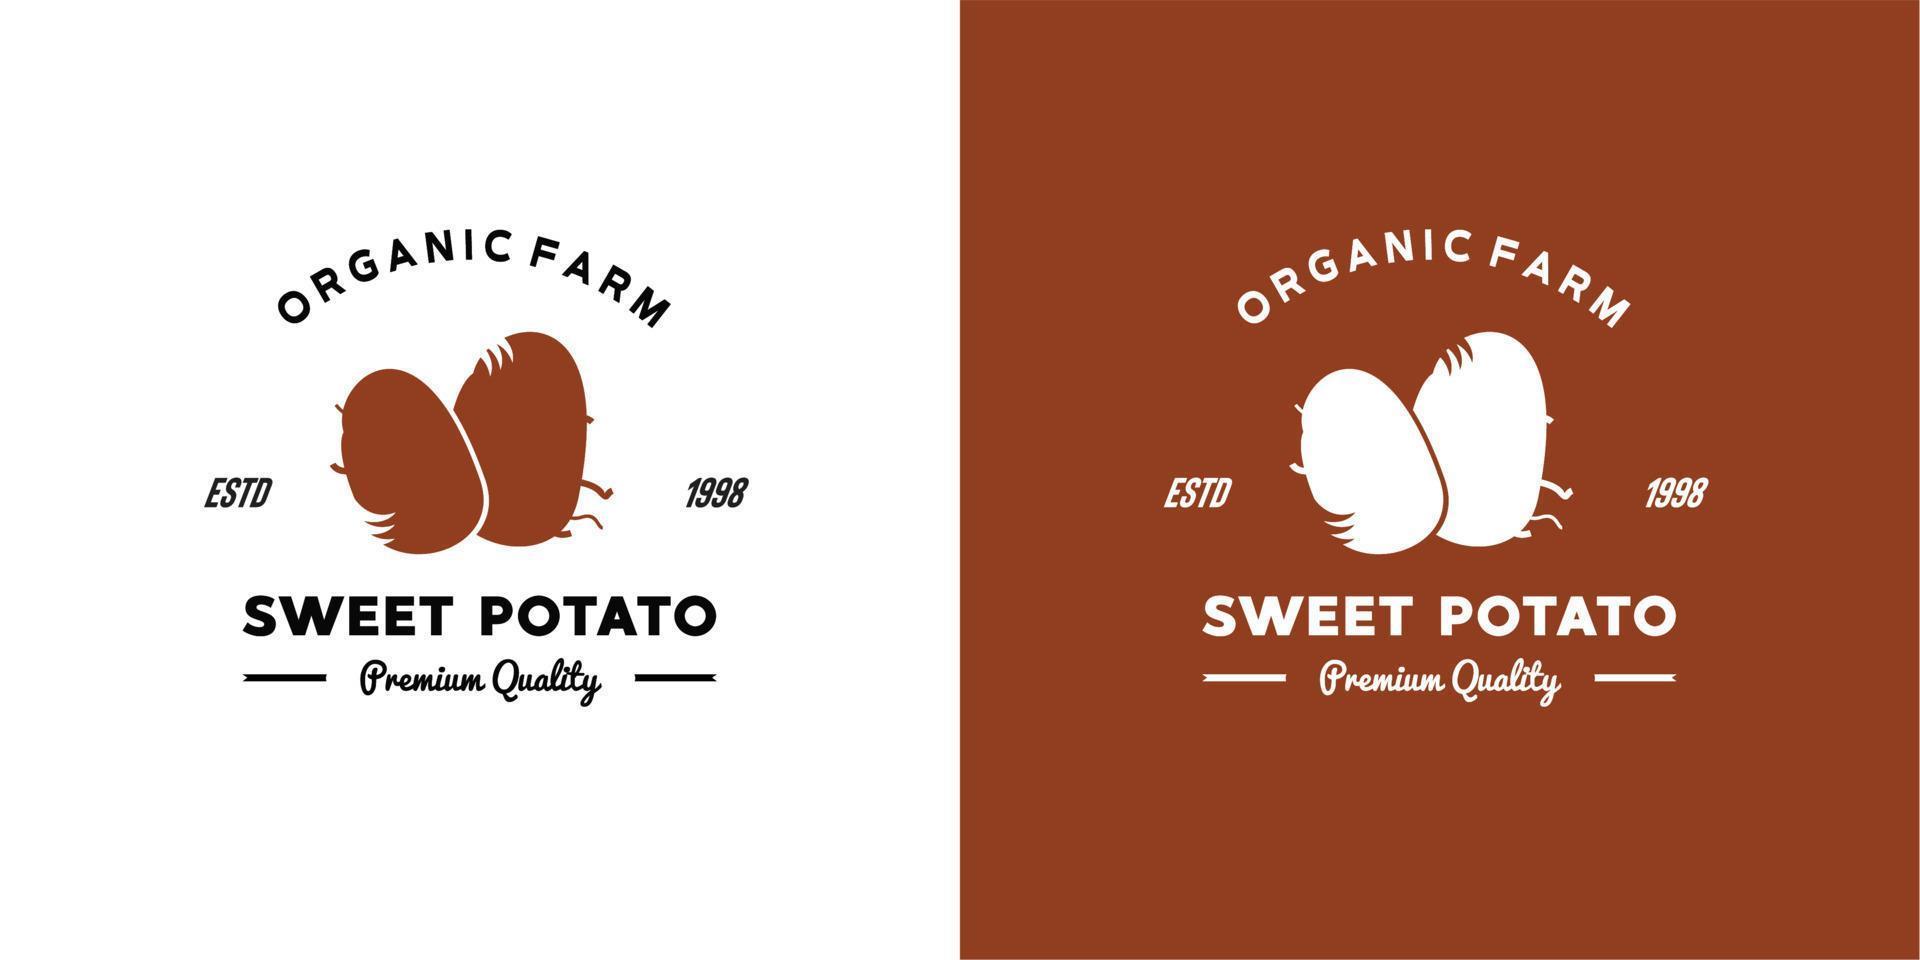 ILLUSTRATION VECTOR GRAPHIC OF brown sweet potato vegetable from organic farm GOOD FOR potato vintage logo retail shop grocery market